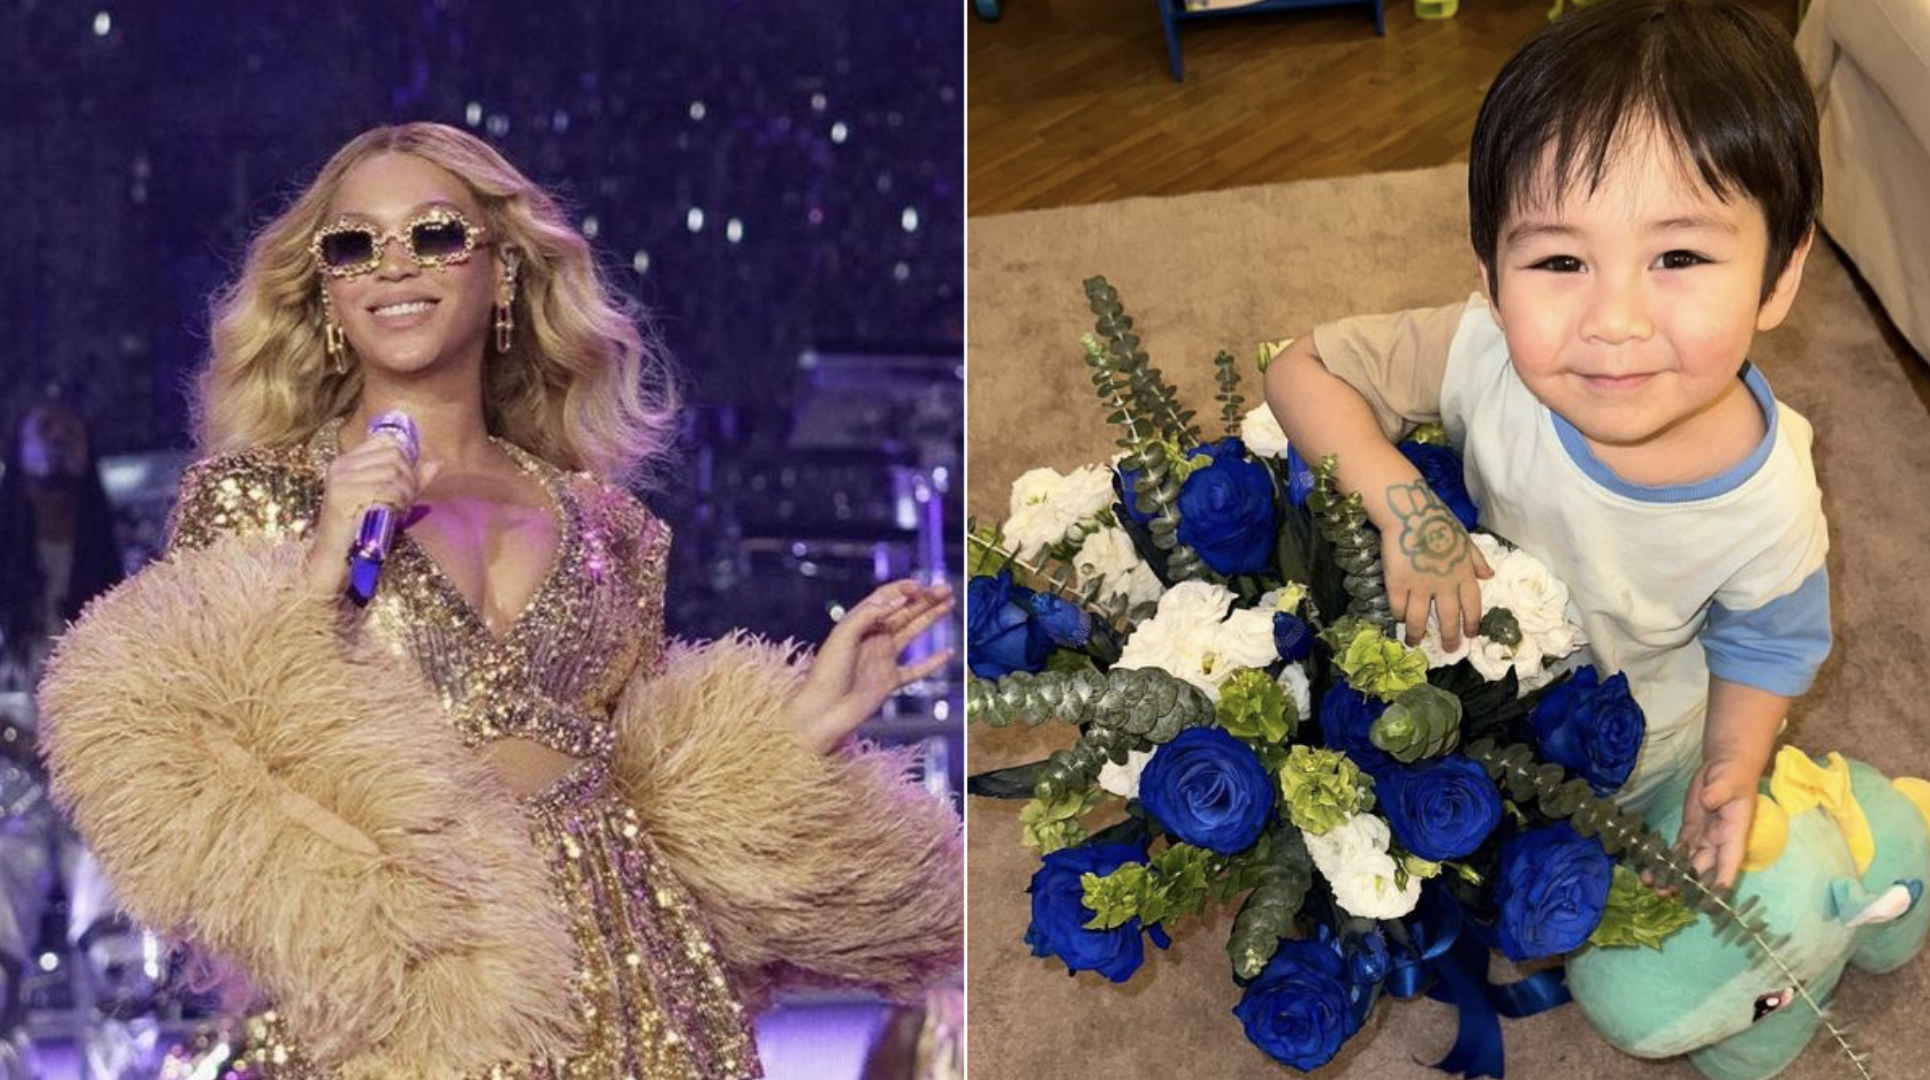 Beyoncé Surprises 2-Year-Old with Gifts After Viral TikTok video.